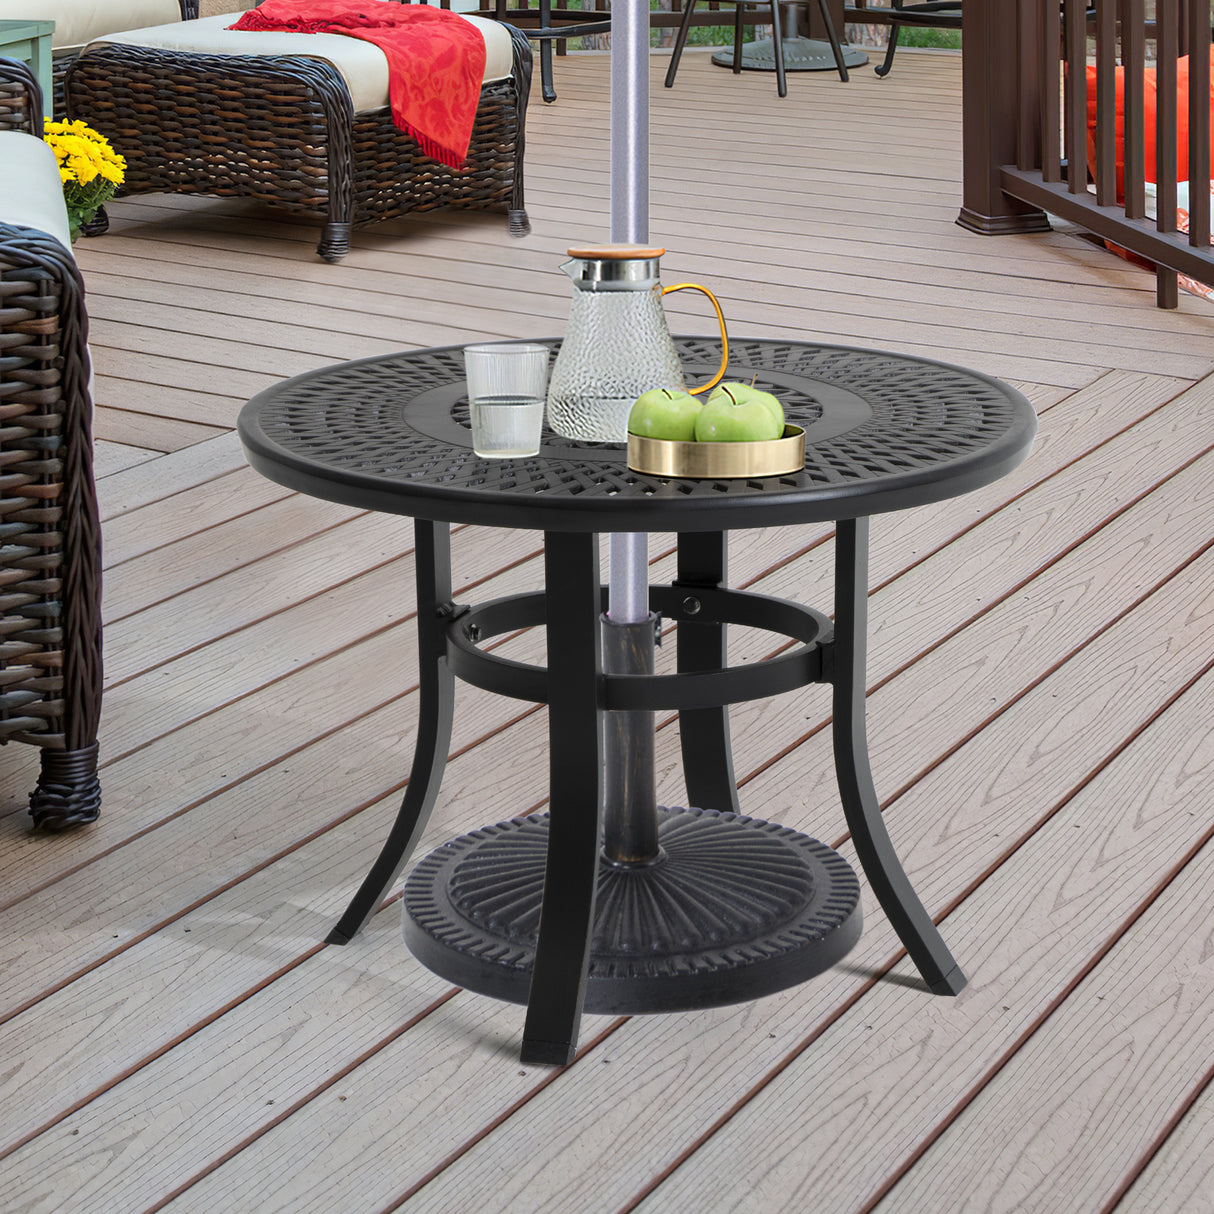 24" Black Rounded Metal Outdoor Bistro Table With Umbrella Hole